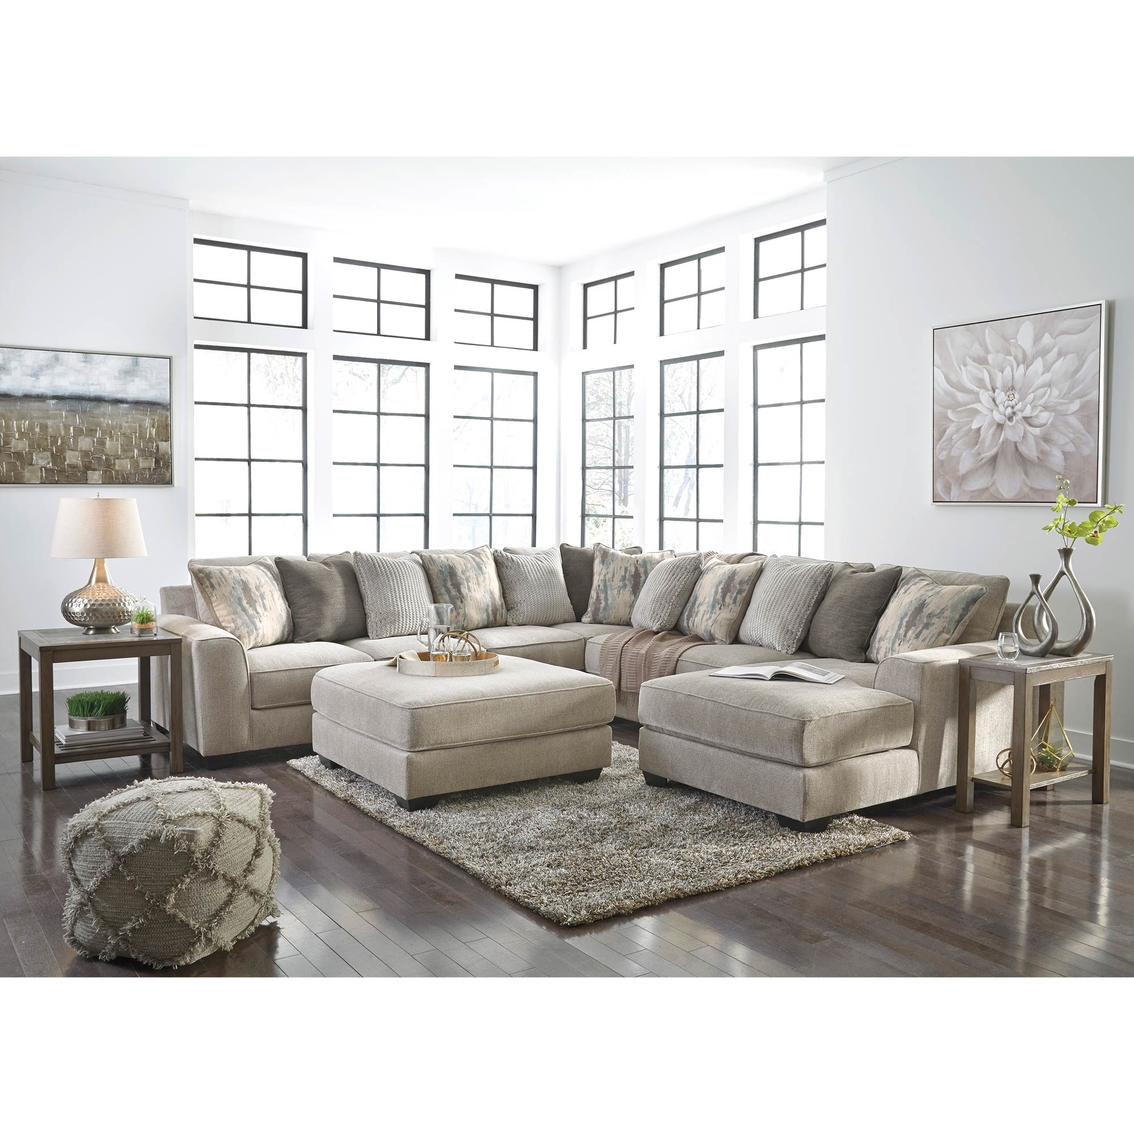 Benchcraft Ardsley 4 pc. LAF Chaise Sectional - Image 2 of 2